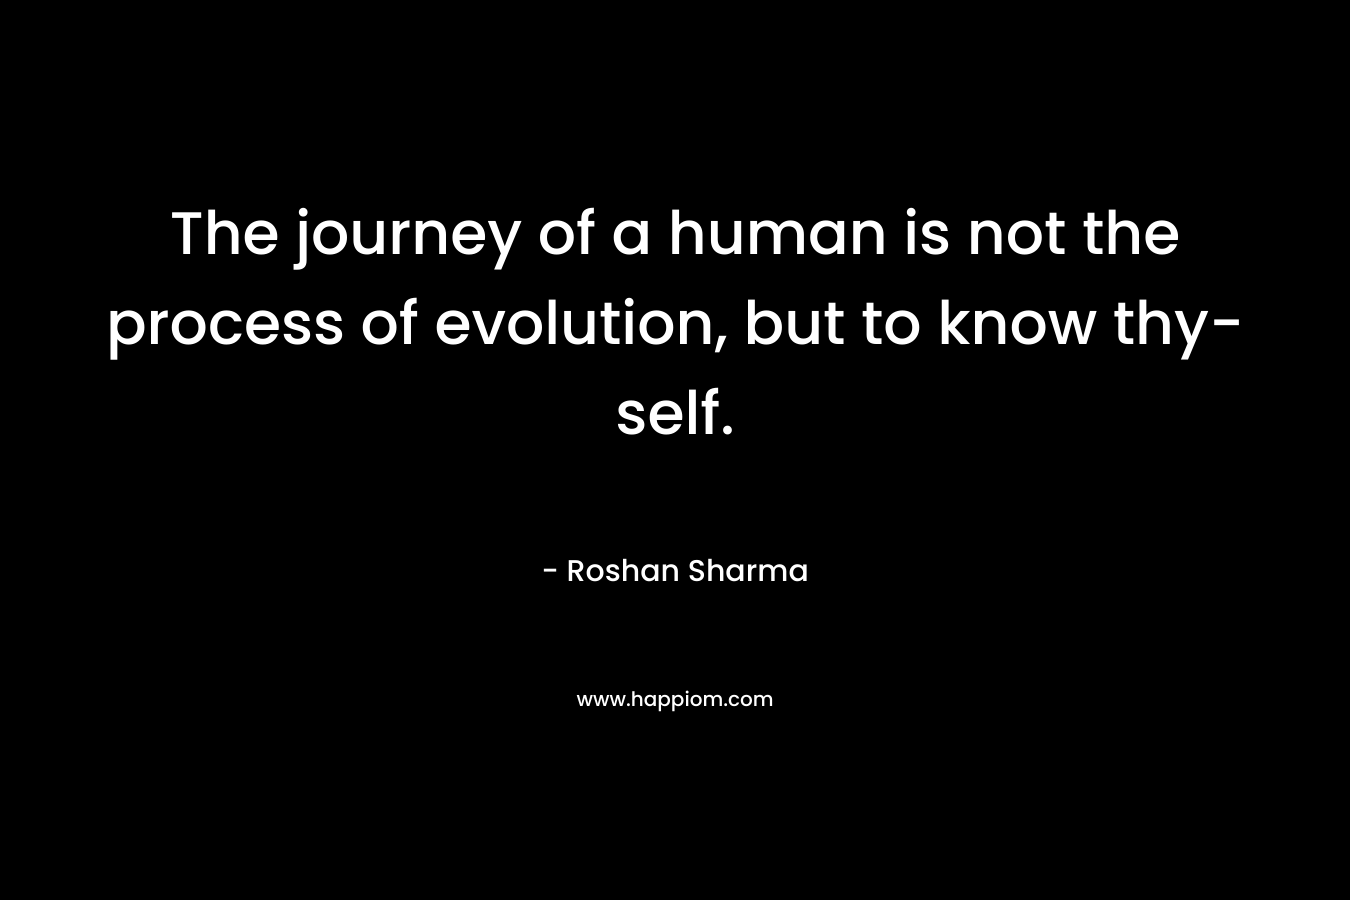 The journey of a human is not the process of evolution, but to know thy-self.